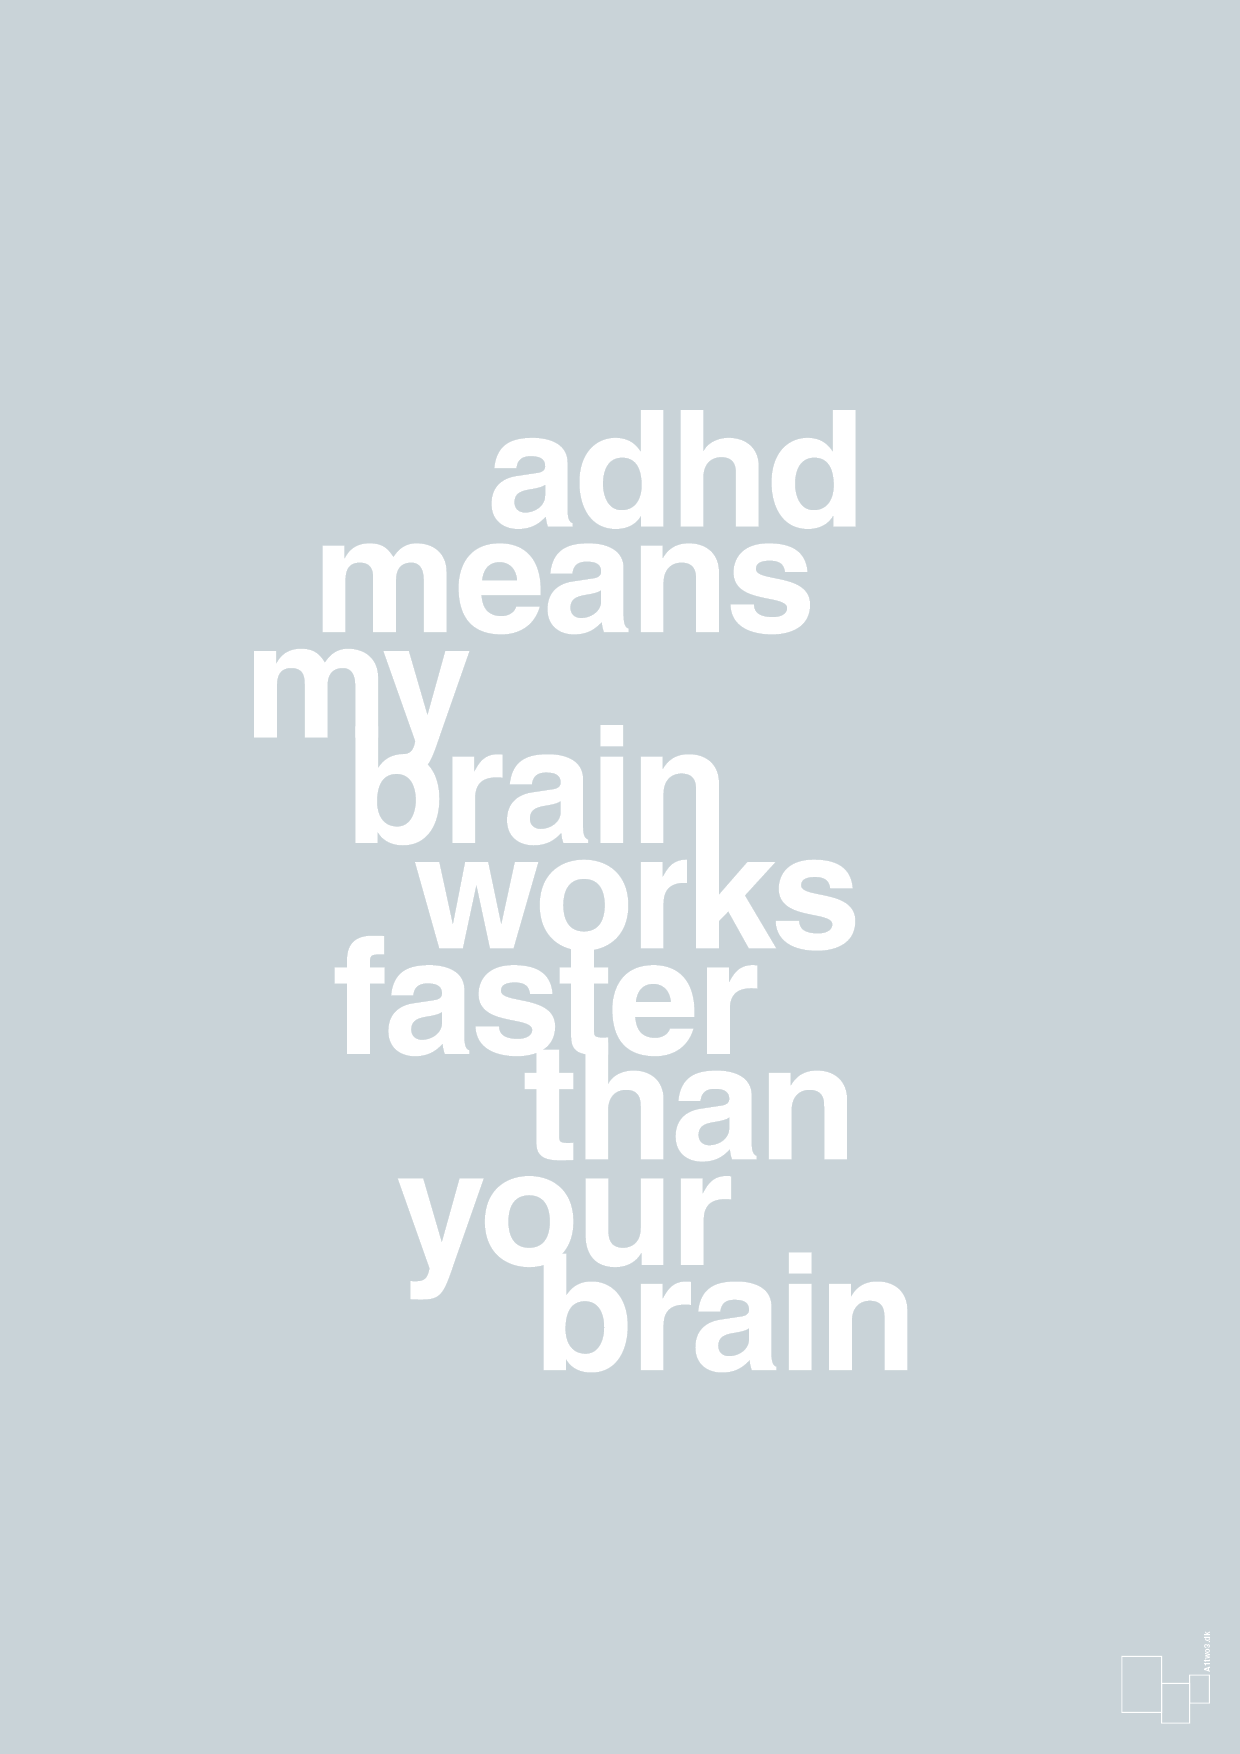 adhd means my brain works faster than your brain - Plakat med Samfund i Light Drizzle